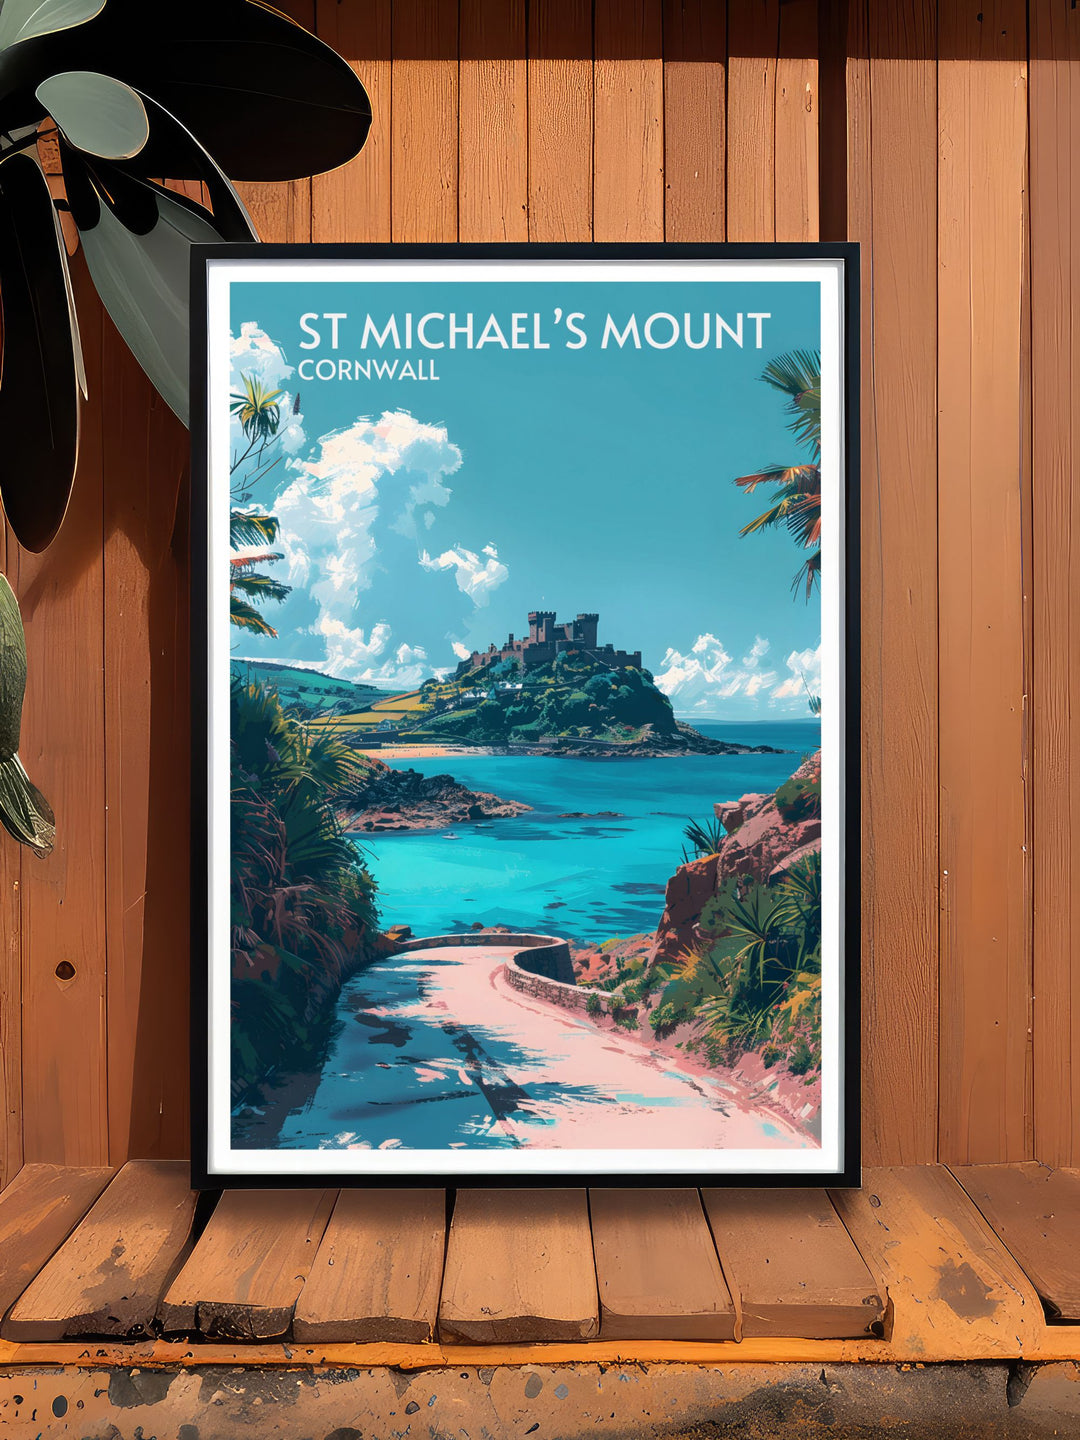 Vintage travel poster of Jurassic Coast featuring the stunning coastal scenery and rich history of this renowned area in England perfect for history buffs and nature lovers.